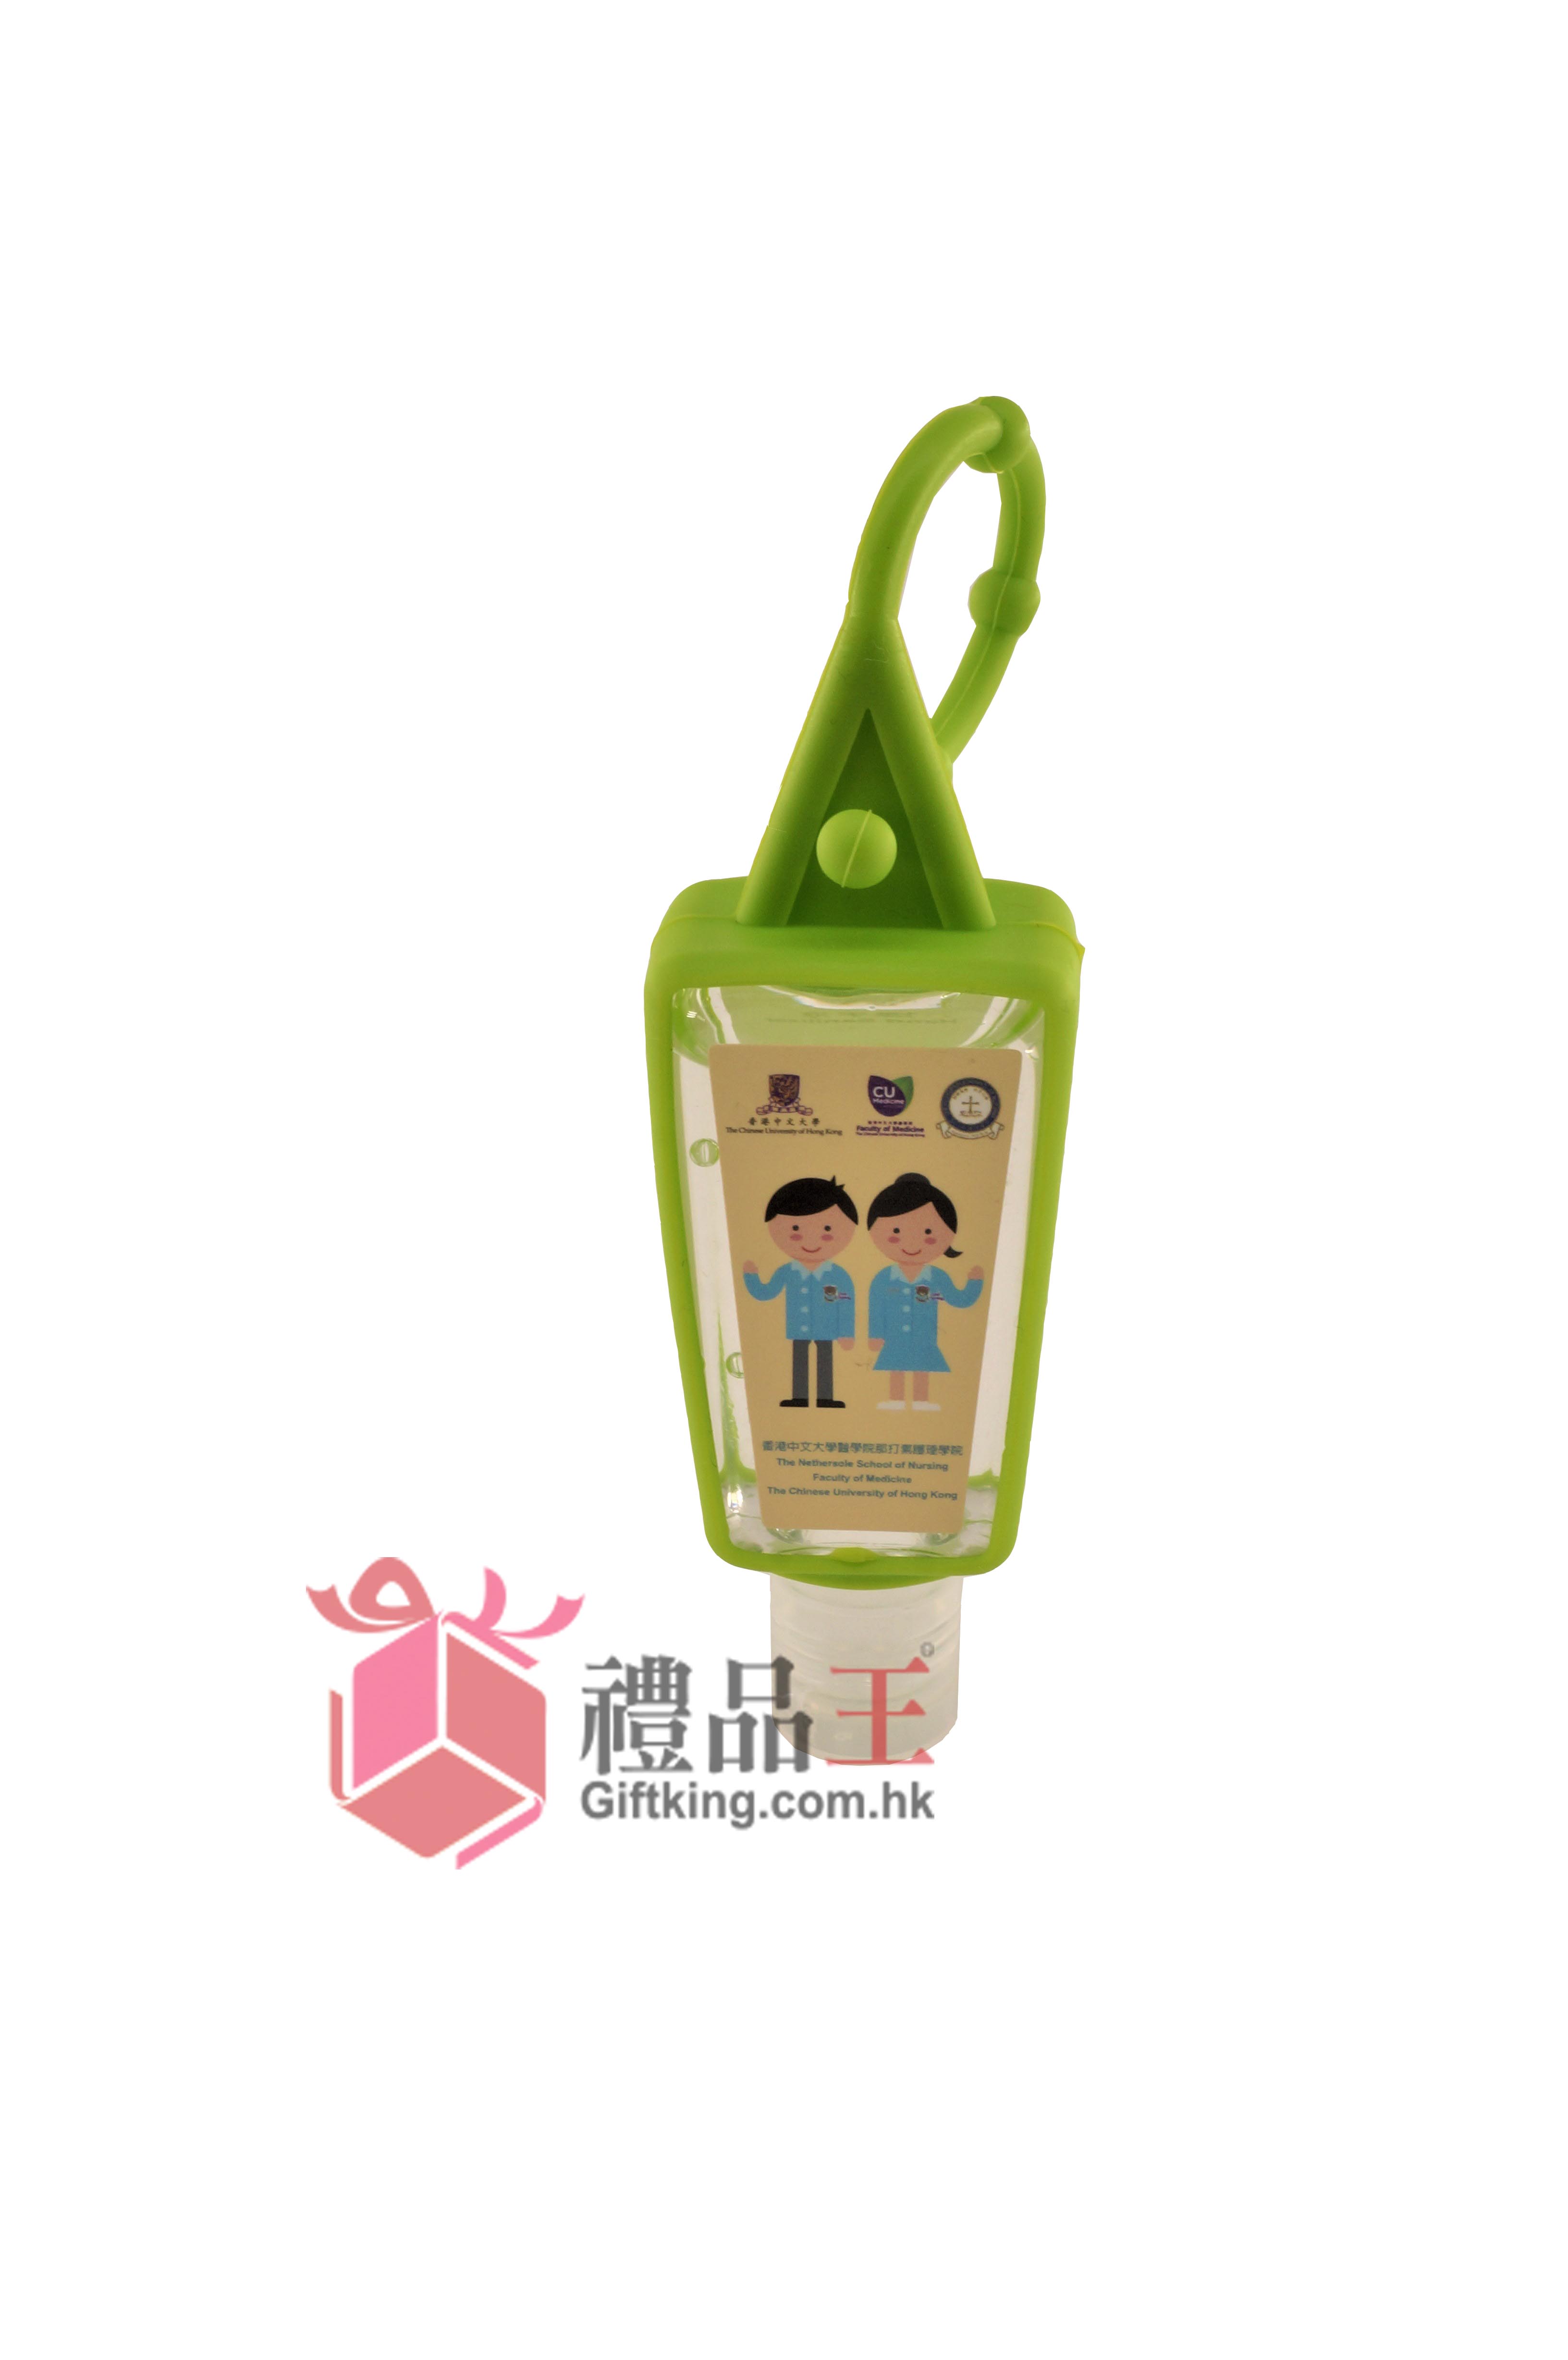 The Nethersole School of Nursing Faculty of Medicine The Chinese University of Hong Kong Portable Silicone Hand Sanitizer (Epidemic Prevention Gift)